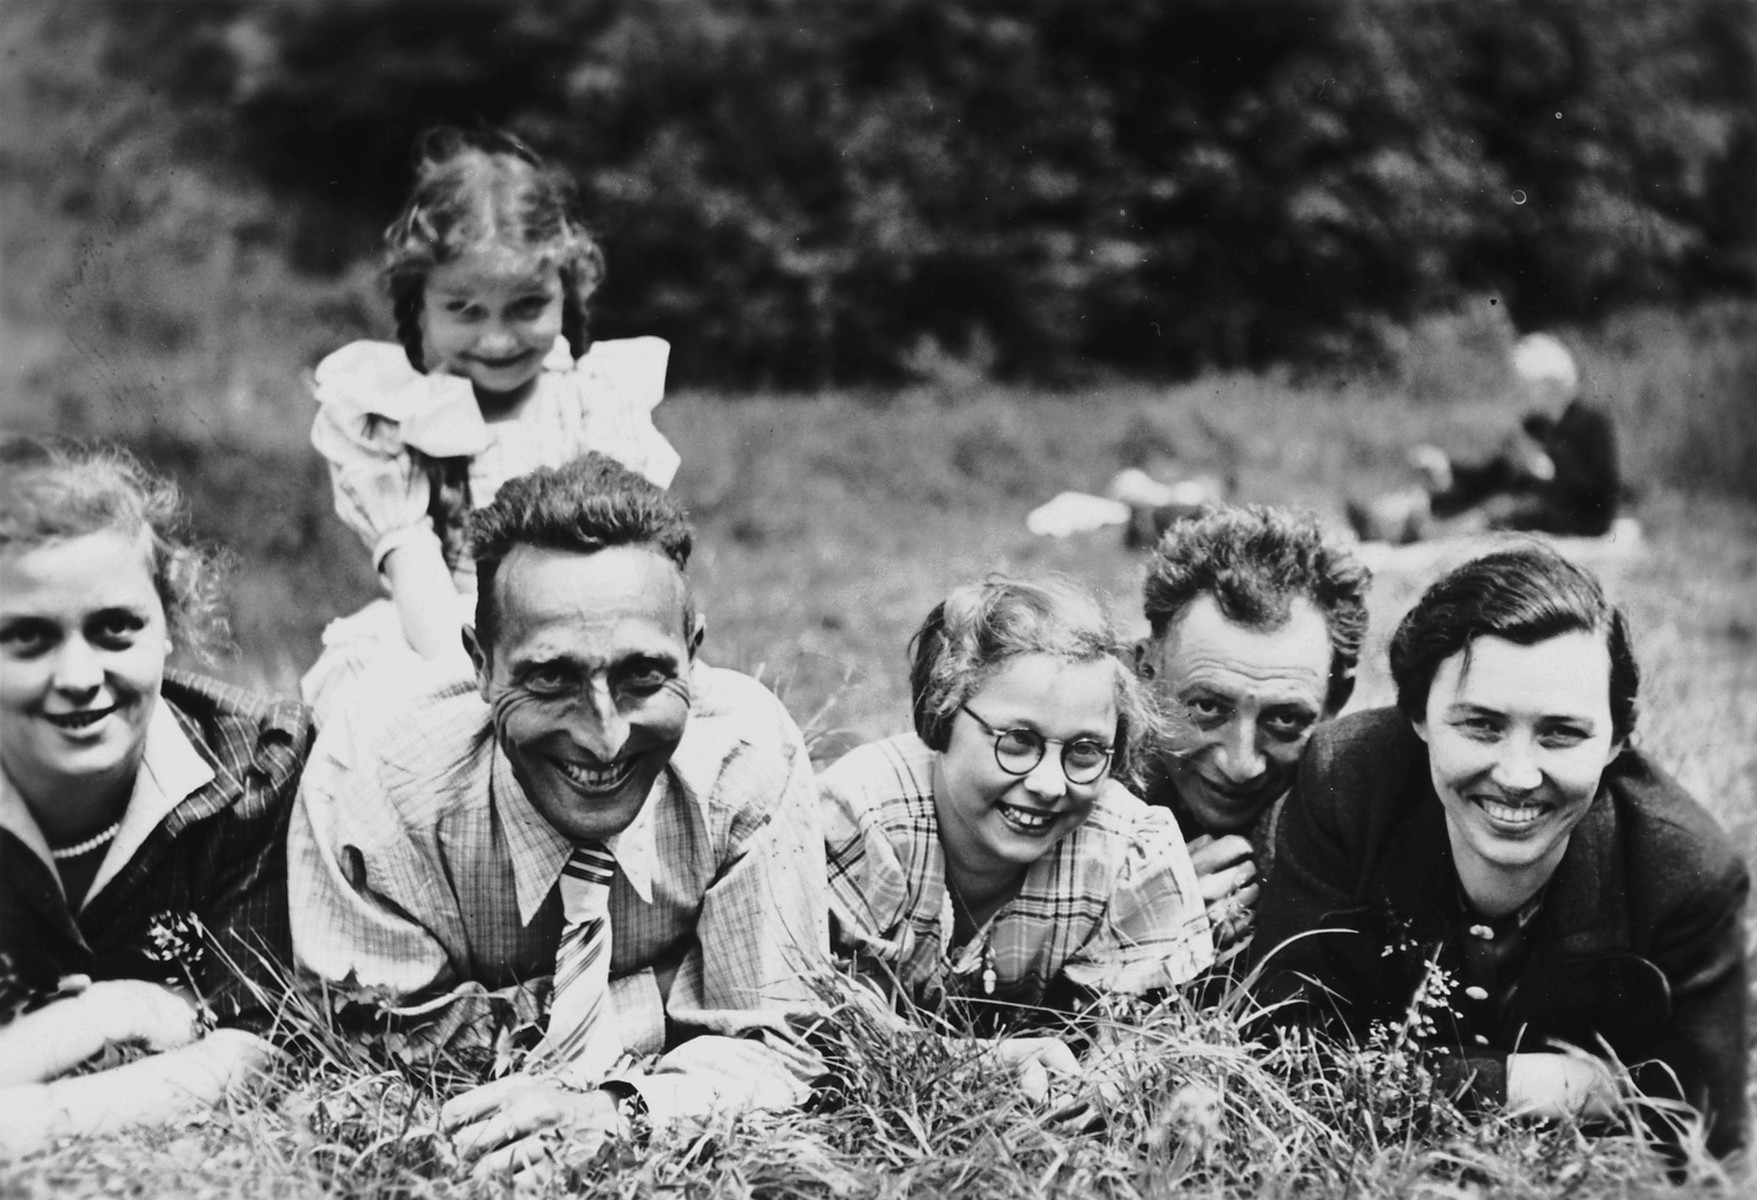 An intermarried German-Jewish family poses for a pictures while on a Sunday walk in the woods with Jewish friends.

Pictured on the left are Margot, Aloisia, Richard and Hannelore Schwarzschild.